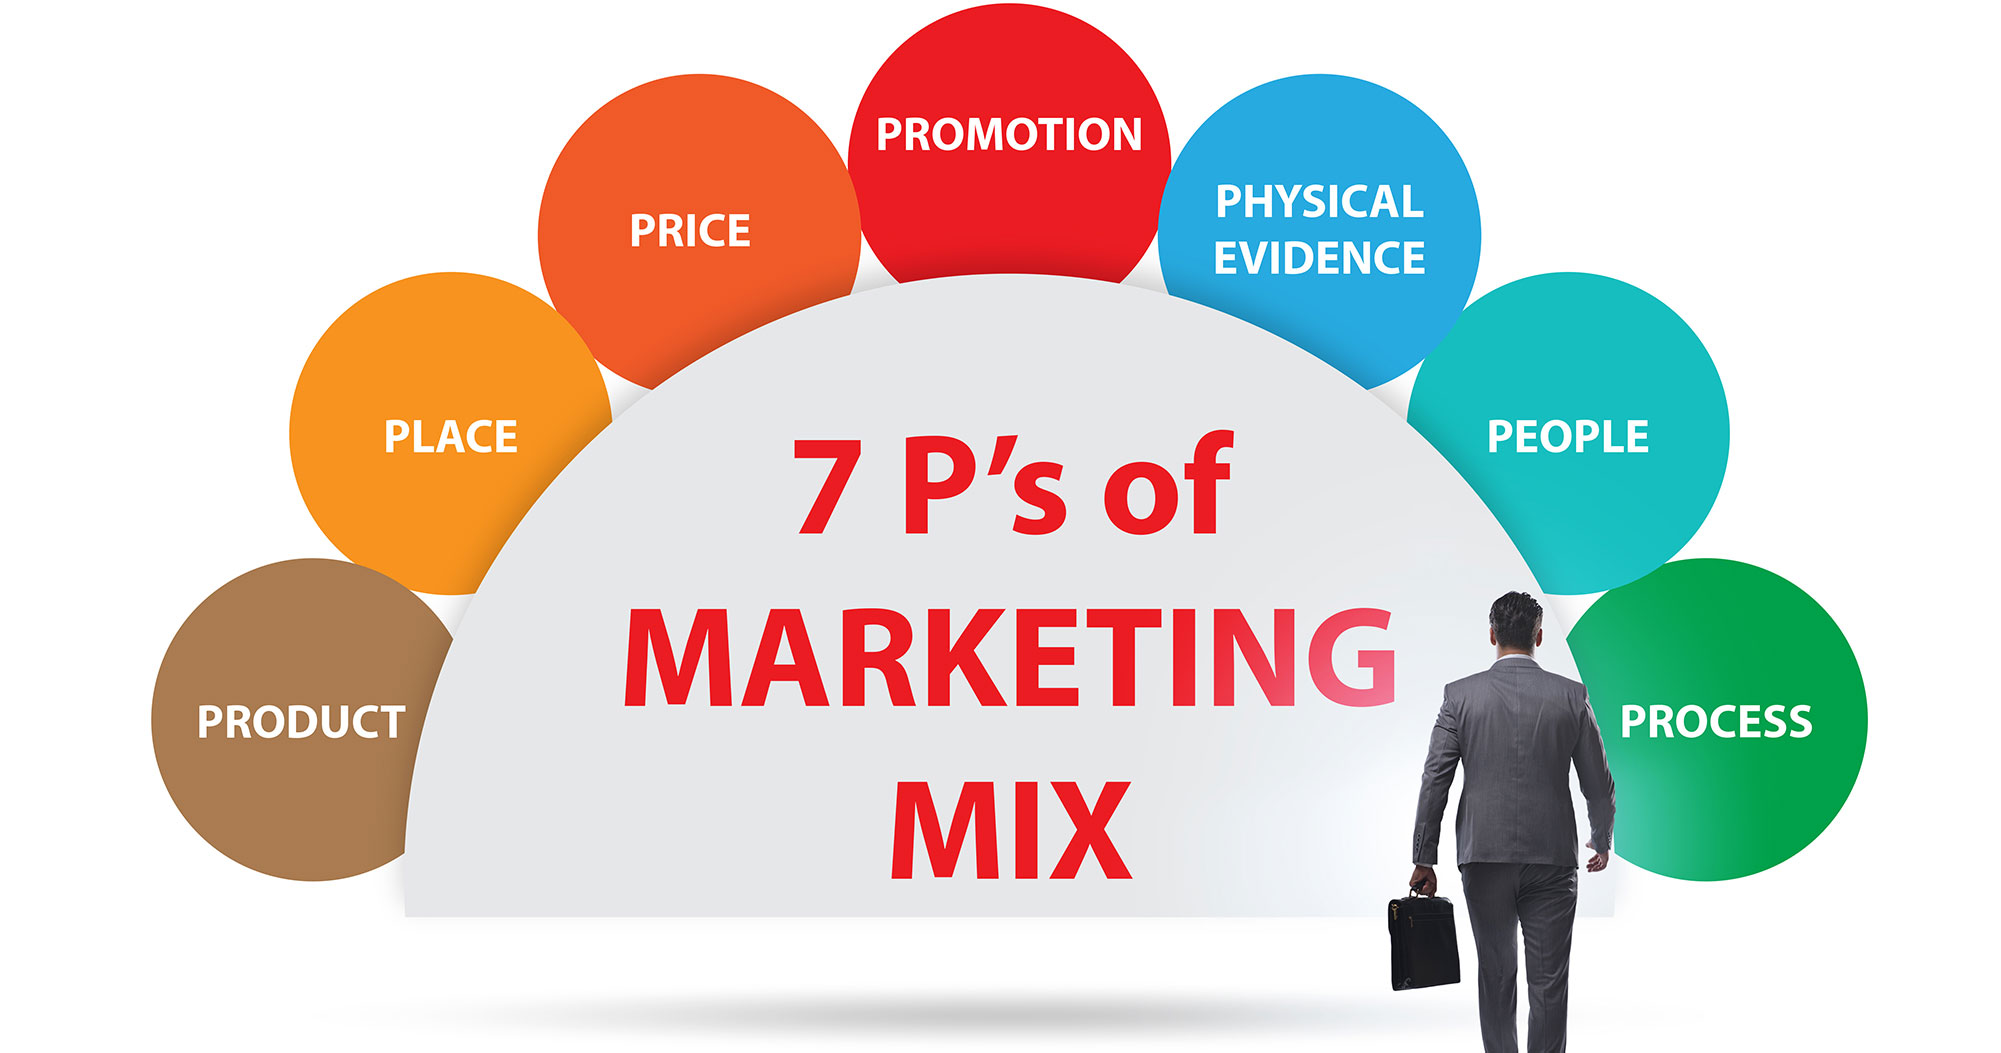 The 7Ps of Marketing Mix